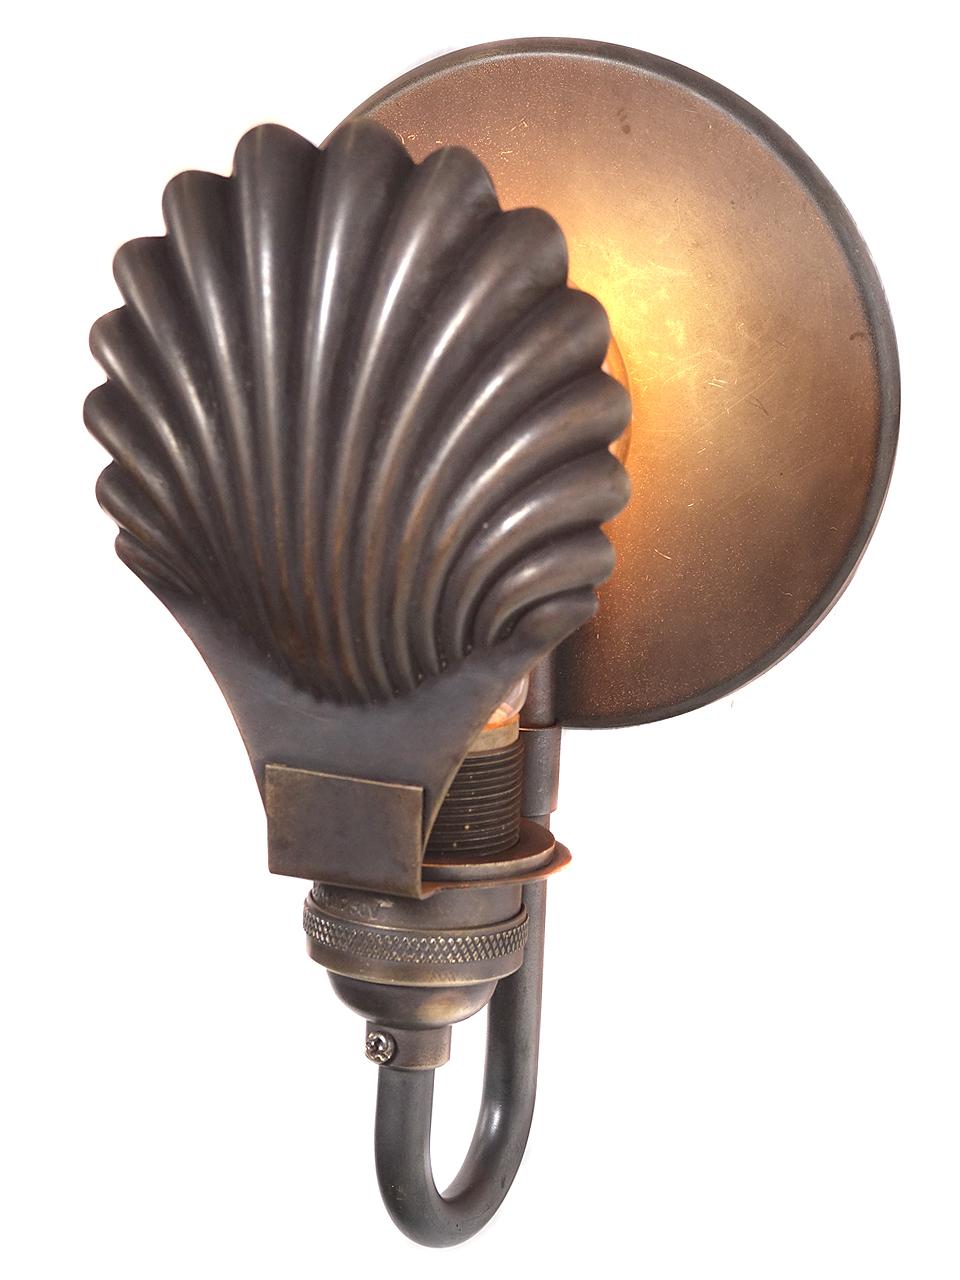 We have a nice collection of these sconces. They small and very elegant with a shade just large enough to shield the bulb. They are priced per lamp.